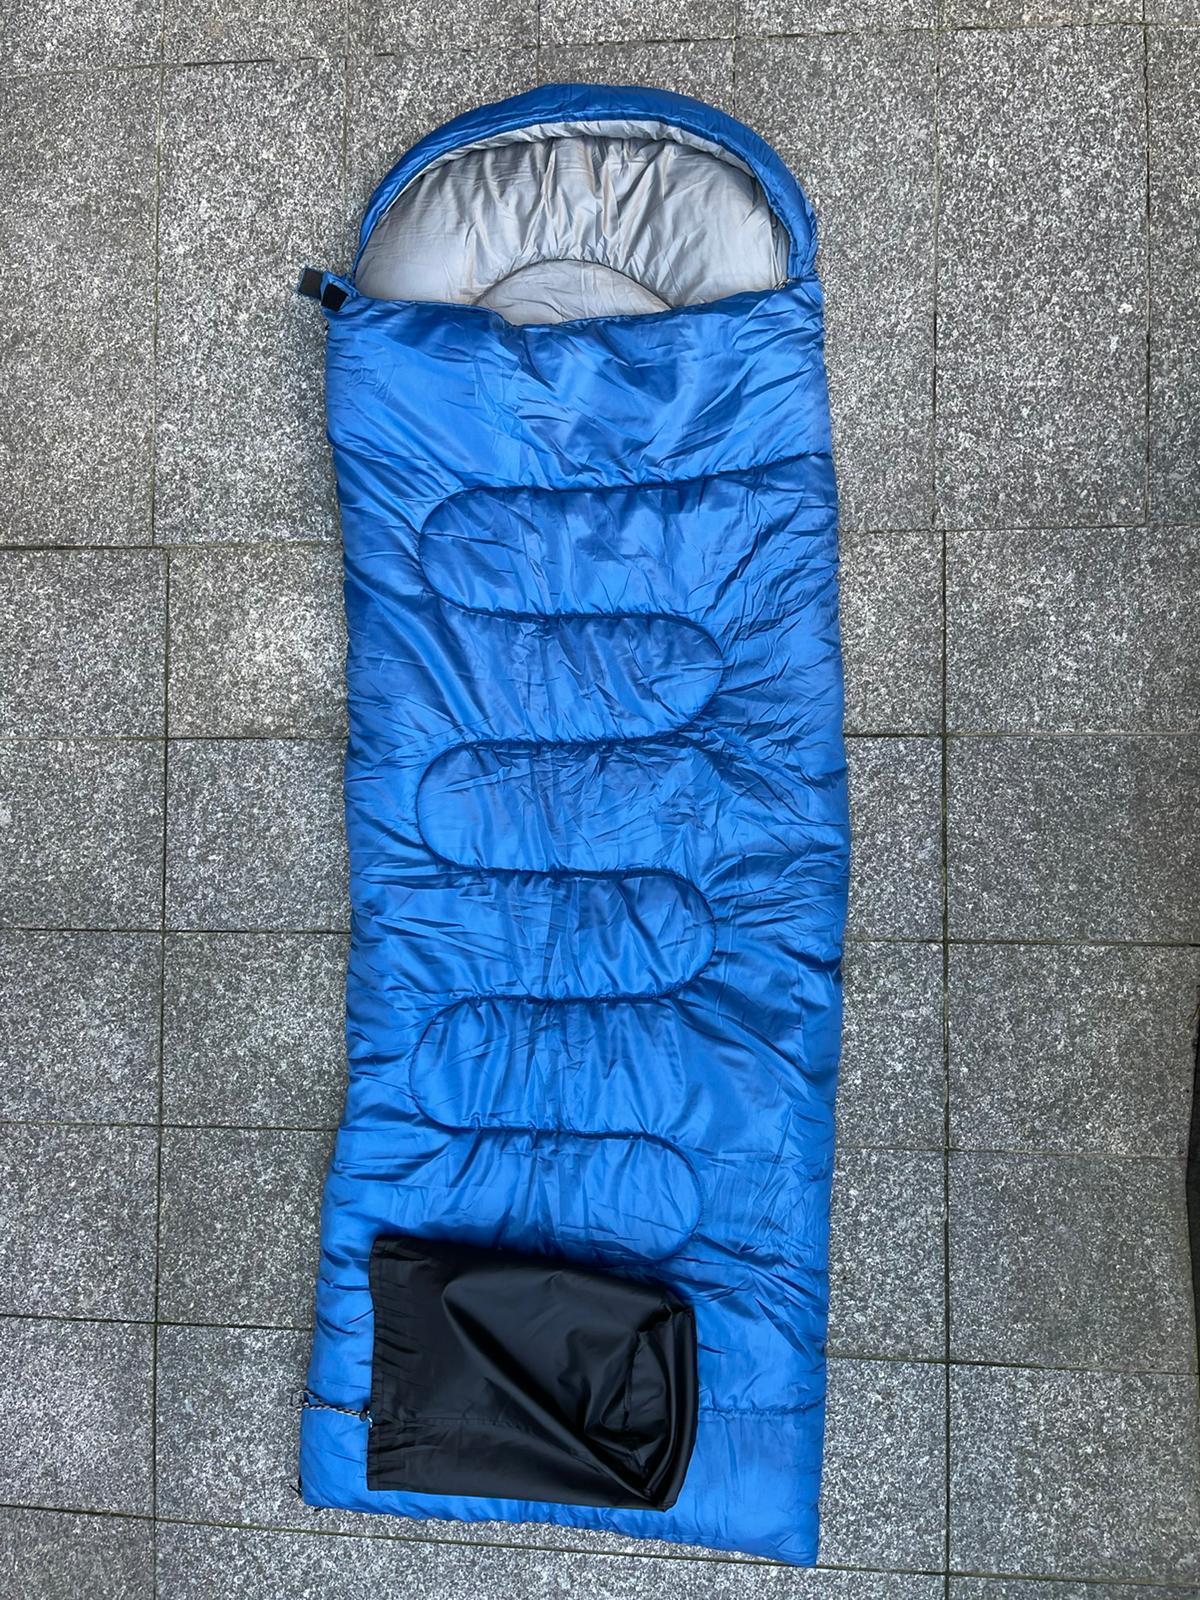 Military Sleeping Bags Cold Weather